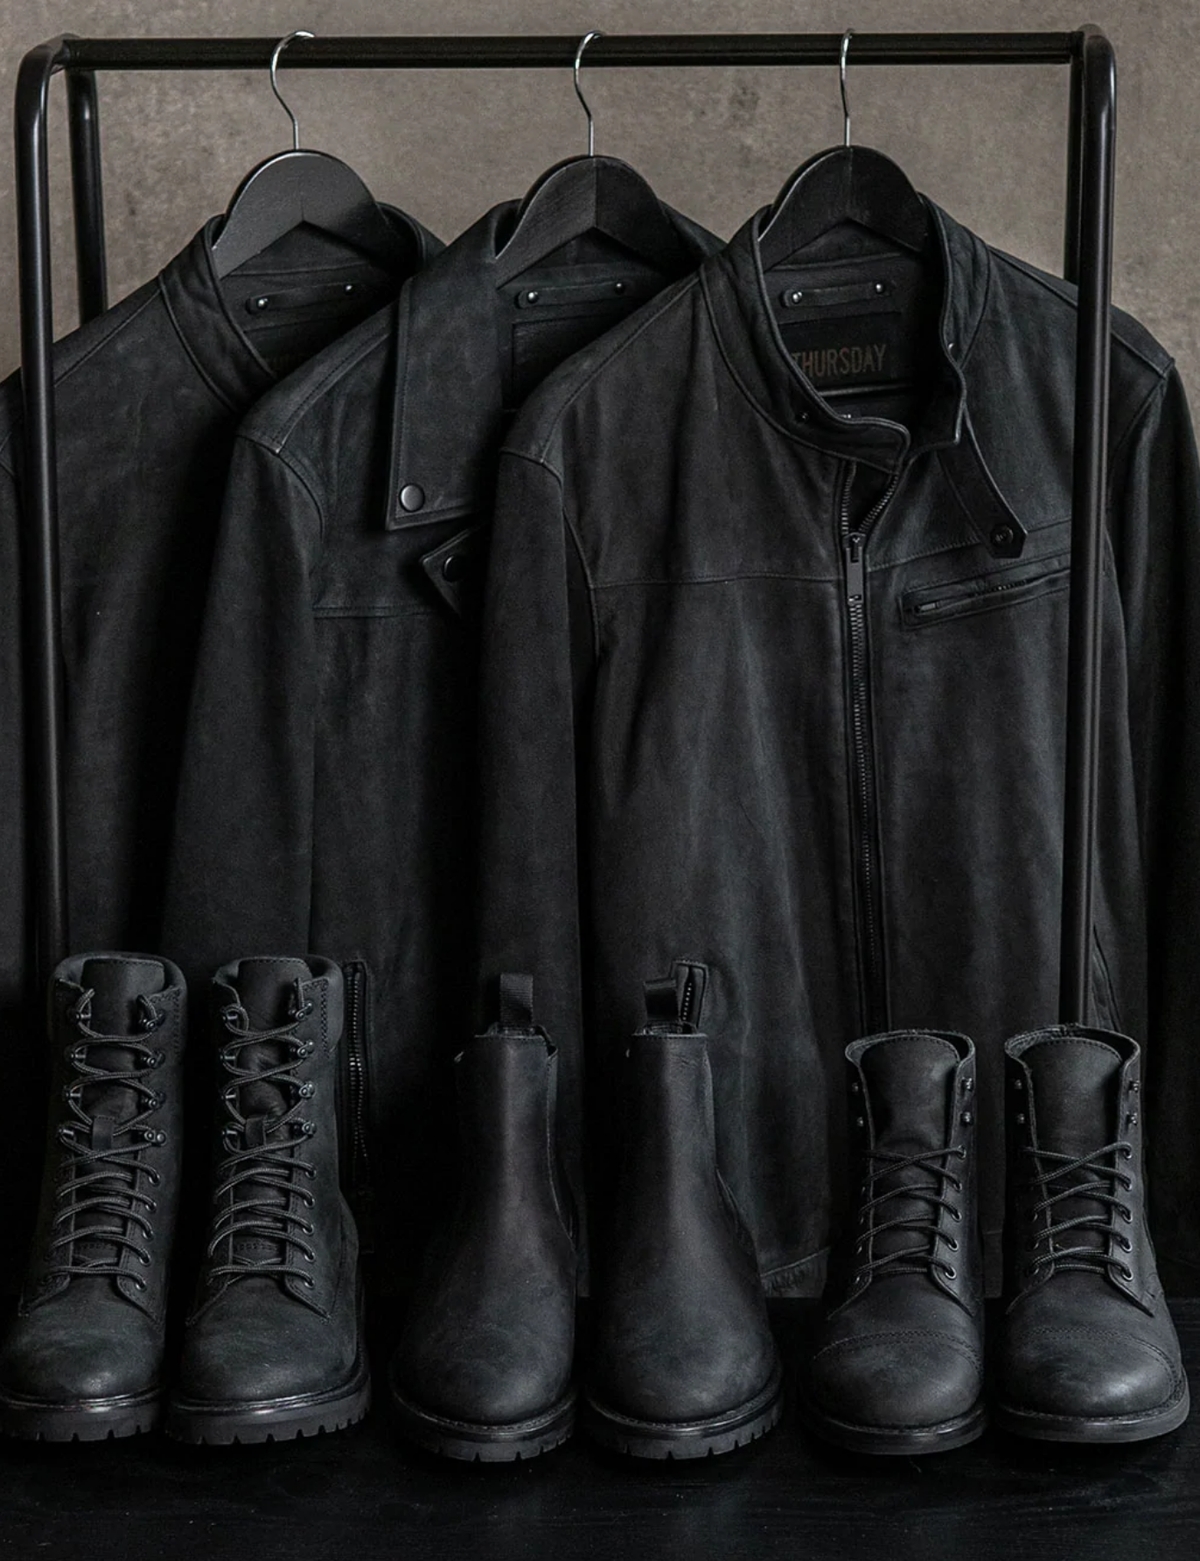 Thursday Black Matte boots and jackets